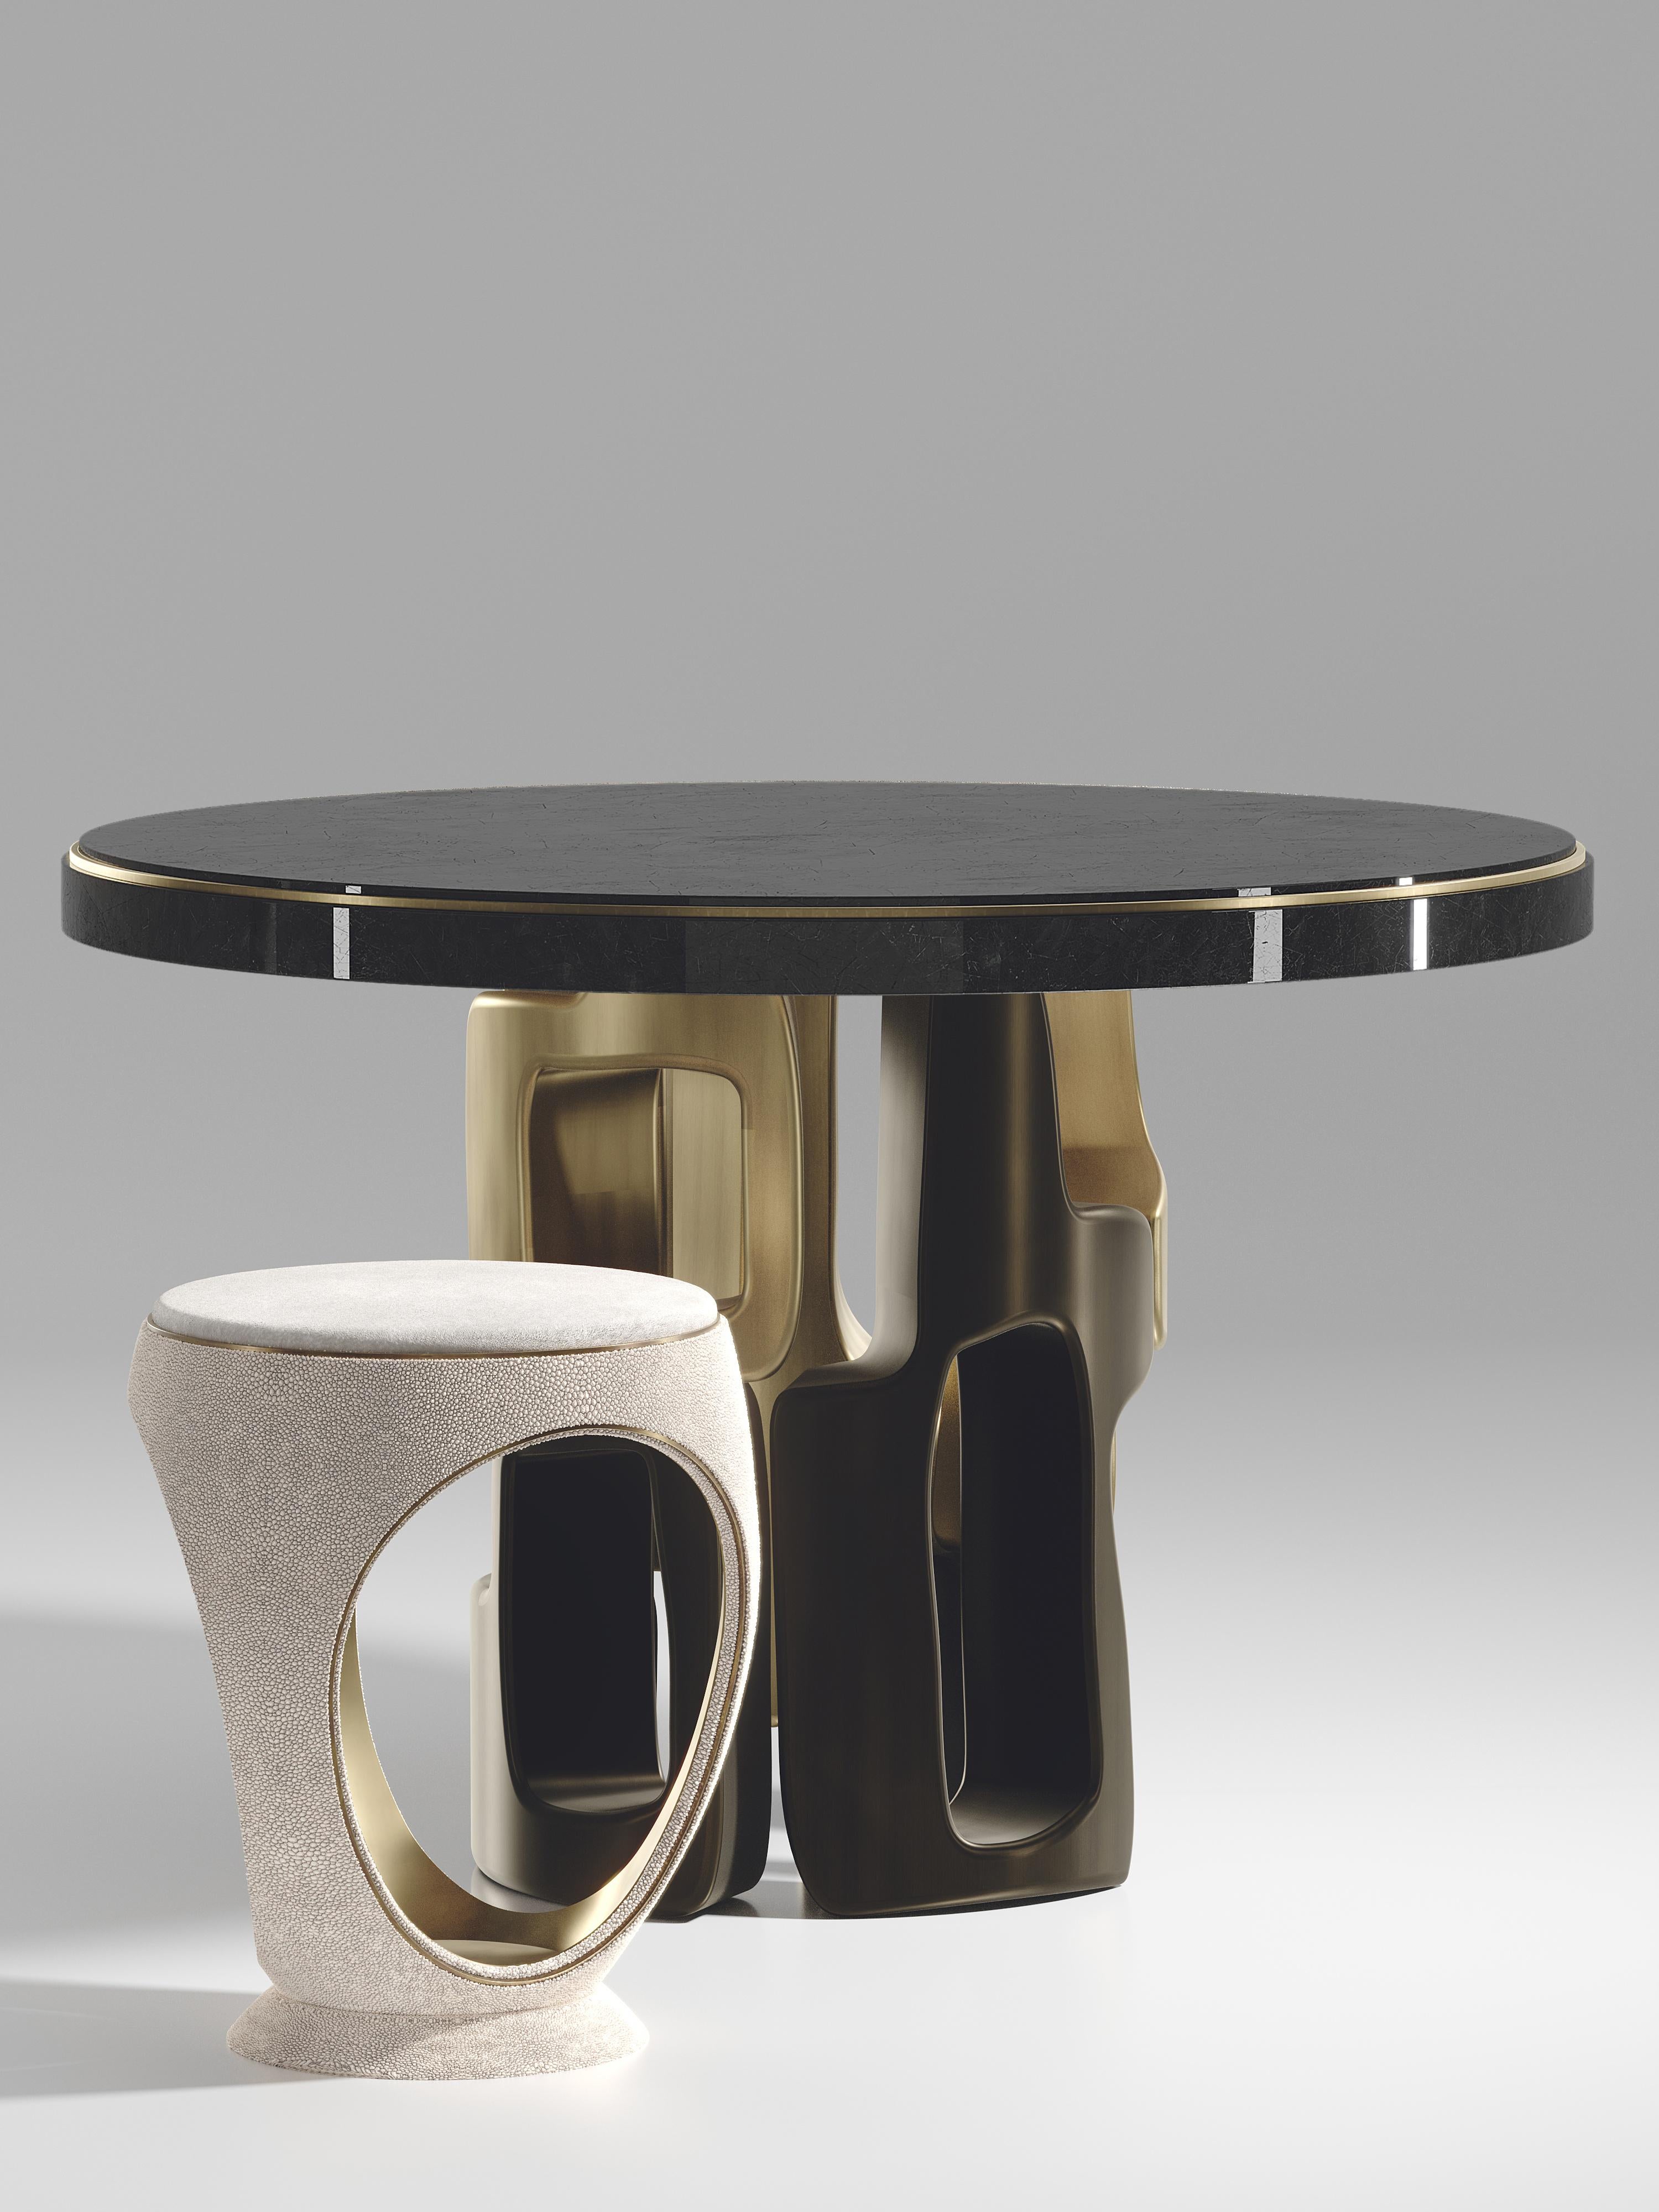 The Apoli breakfast table by Kifu Paris is both dramatic and organic its unique design. The black pen shell inlaid top sits on an ethereal geometric and sculptural bronze-patina brass base. This piece is designed by Kifu Augousti the daughter of Ria